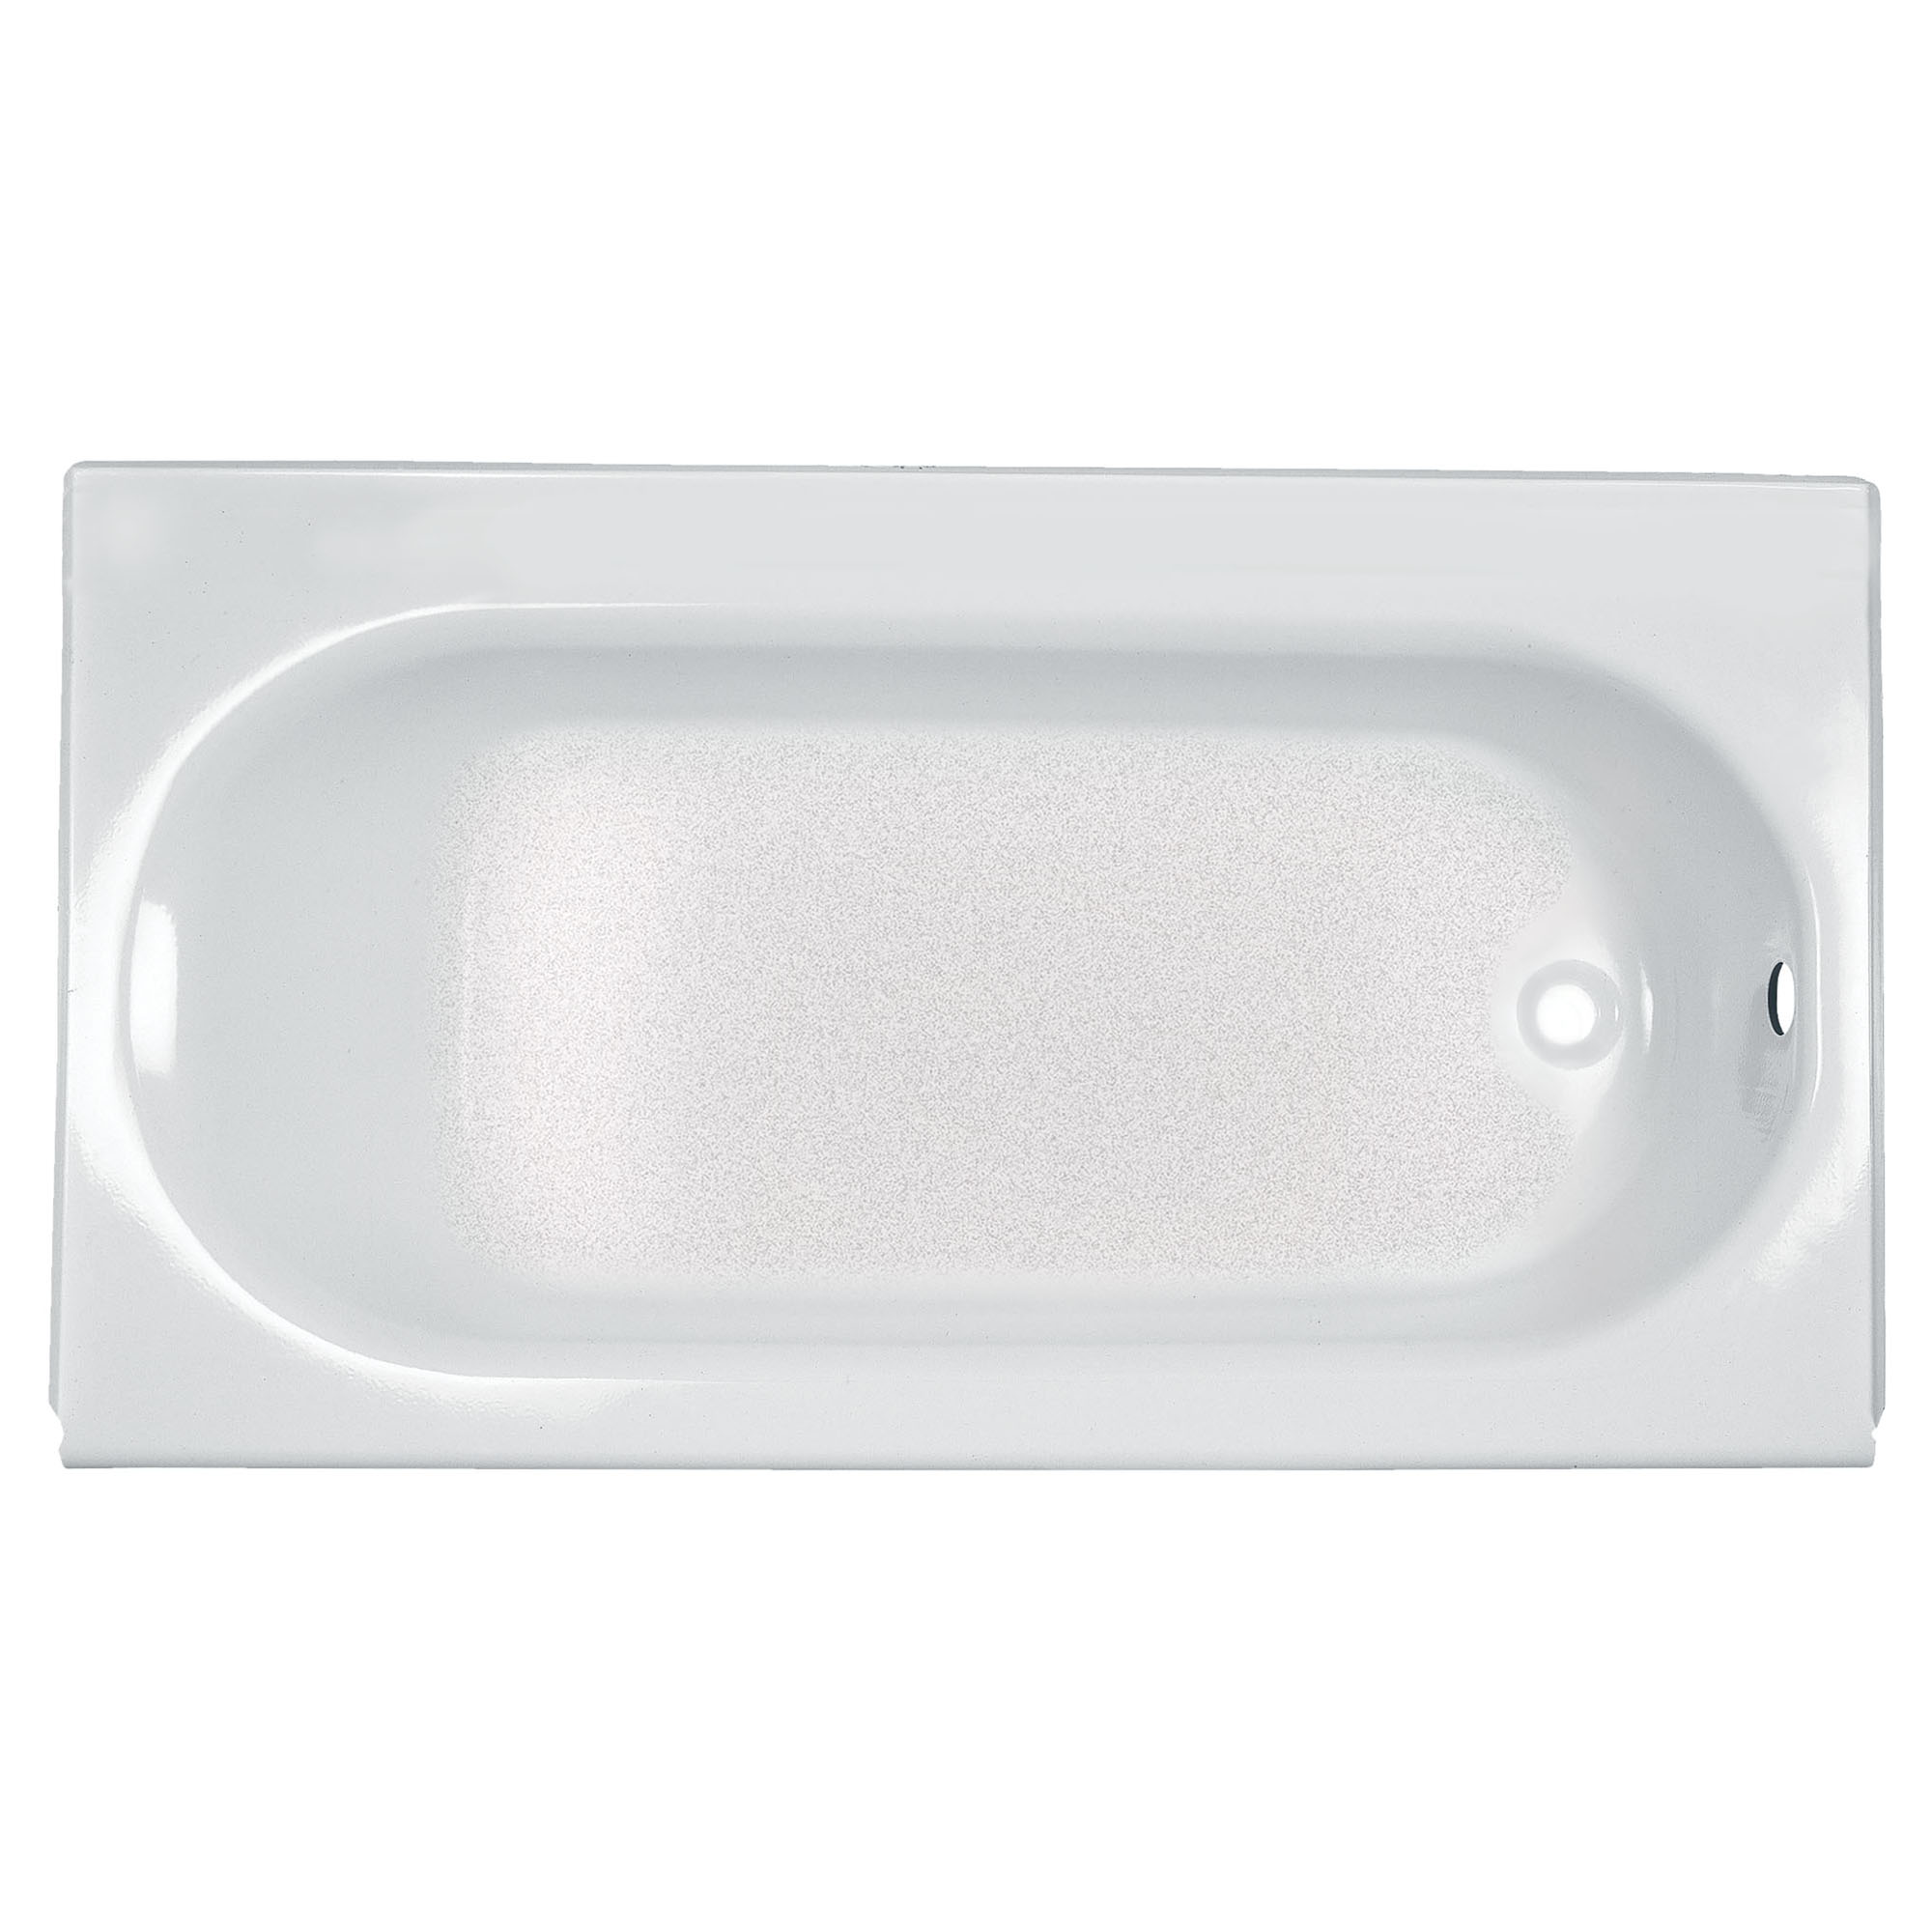 Princeton® Americast® 60 x 34-Inch Integral Apron Bathtub Above Floor Rough Right-Hand Outlet with Luxury Ledge